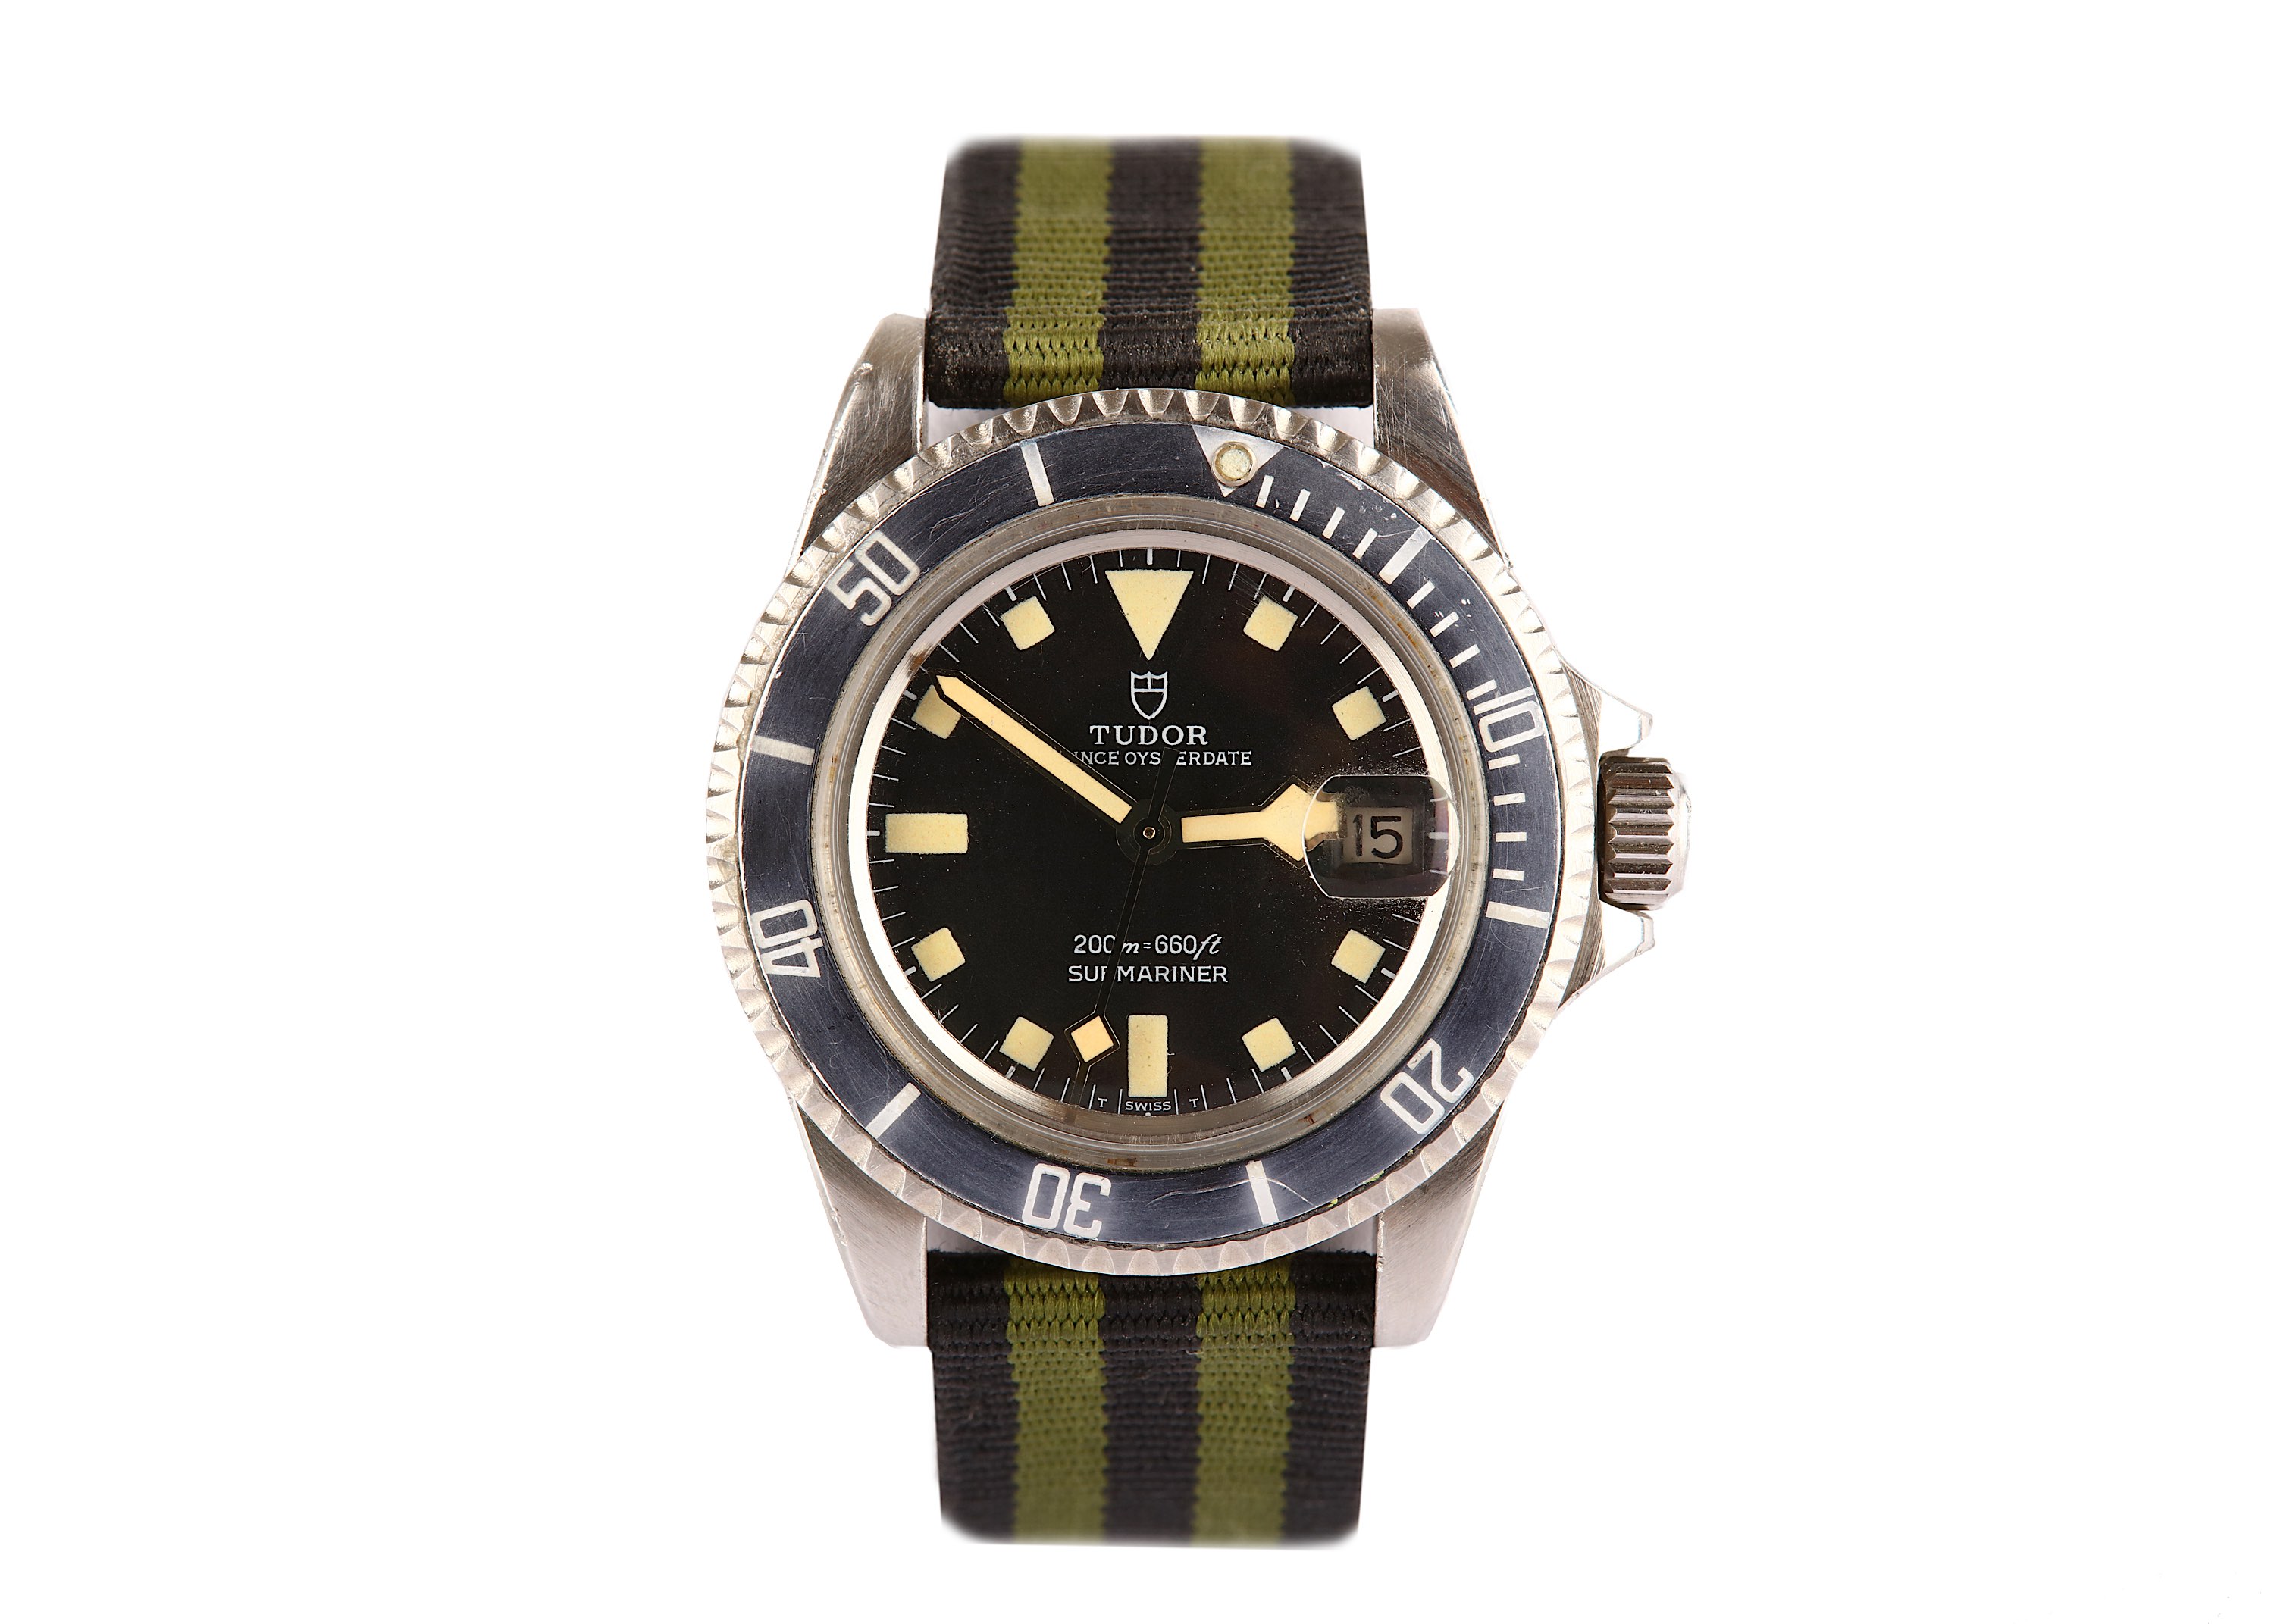 TUDOR. A STAINLESS STEEL AUTOMATIC CALENDAR DIVERS WATCH. Model: Prince Oysterdate Submariner (